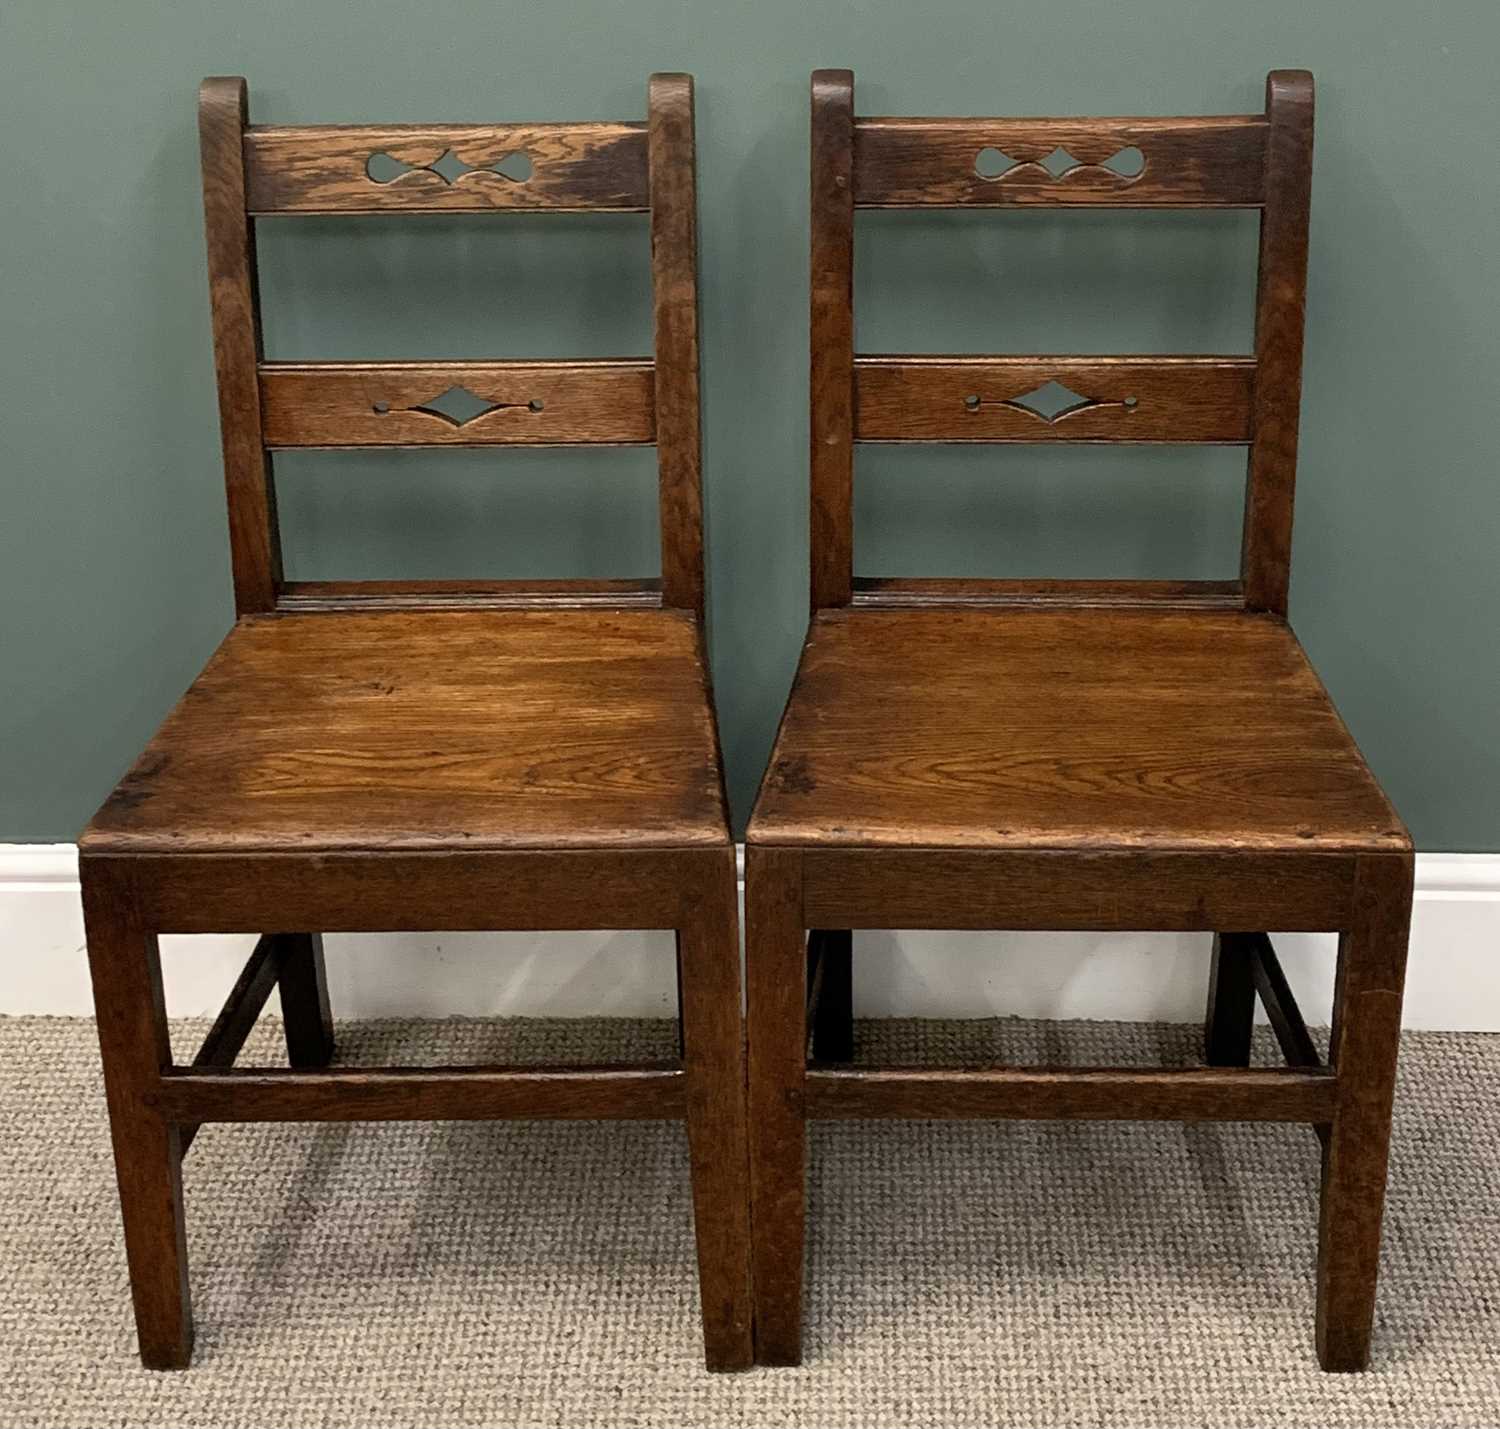 HARLEQUIN GROUP OF FIVE ANTIQUE OAK FARM HOUSE CHAIRS, peg joined construction, comprising pair with - Image 2 of 3